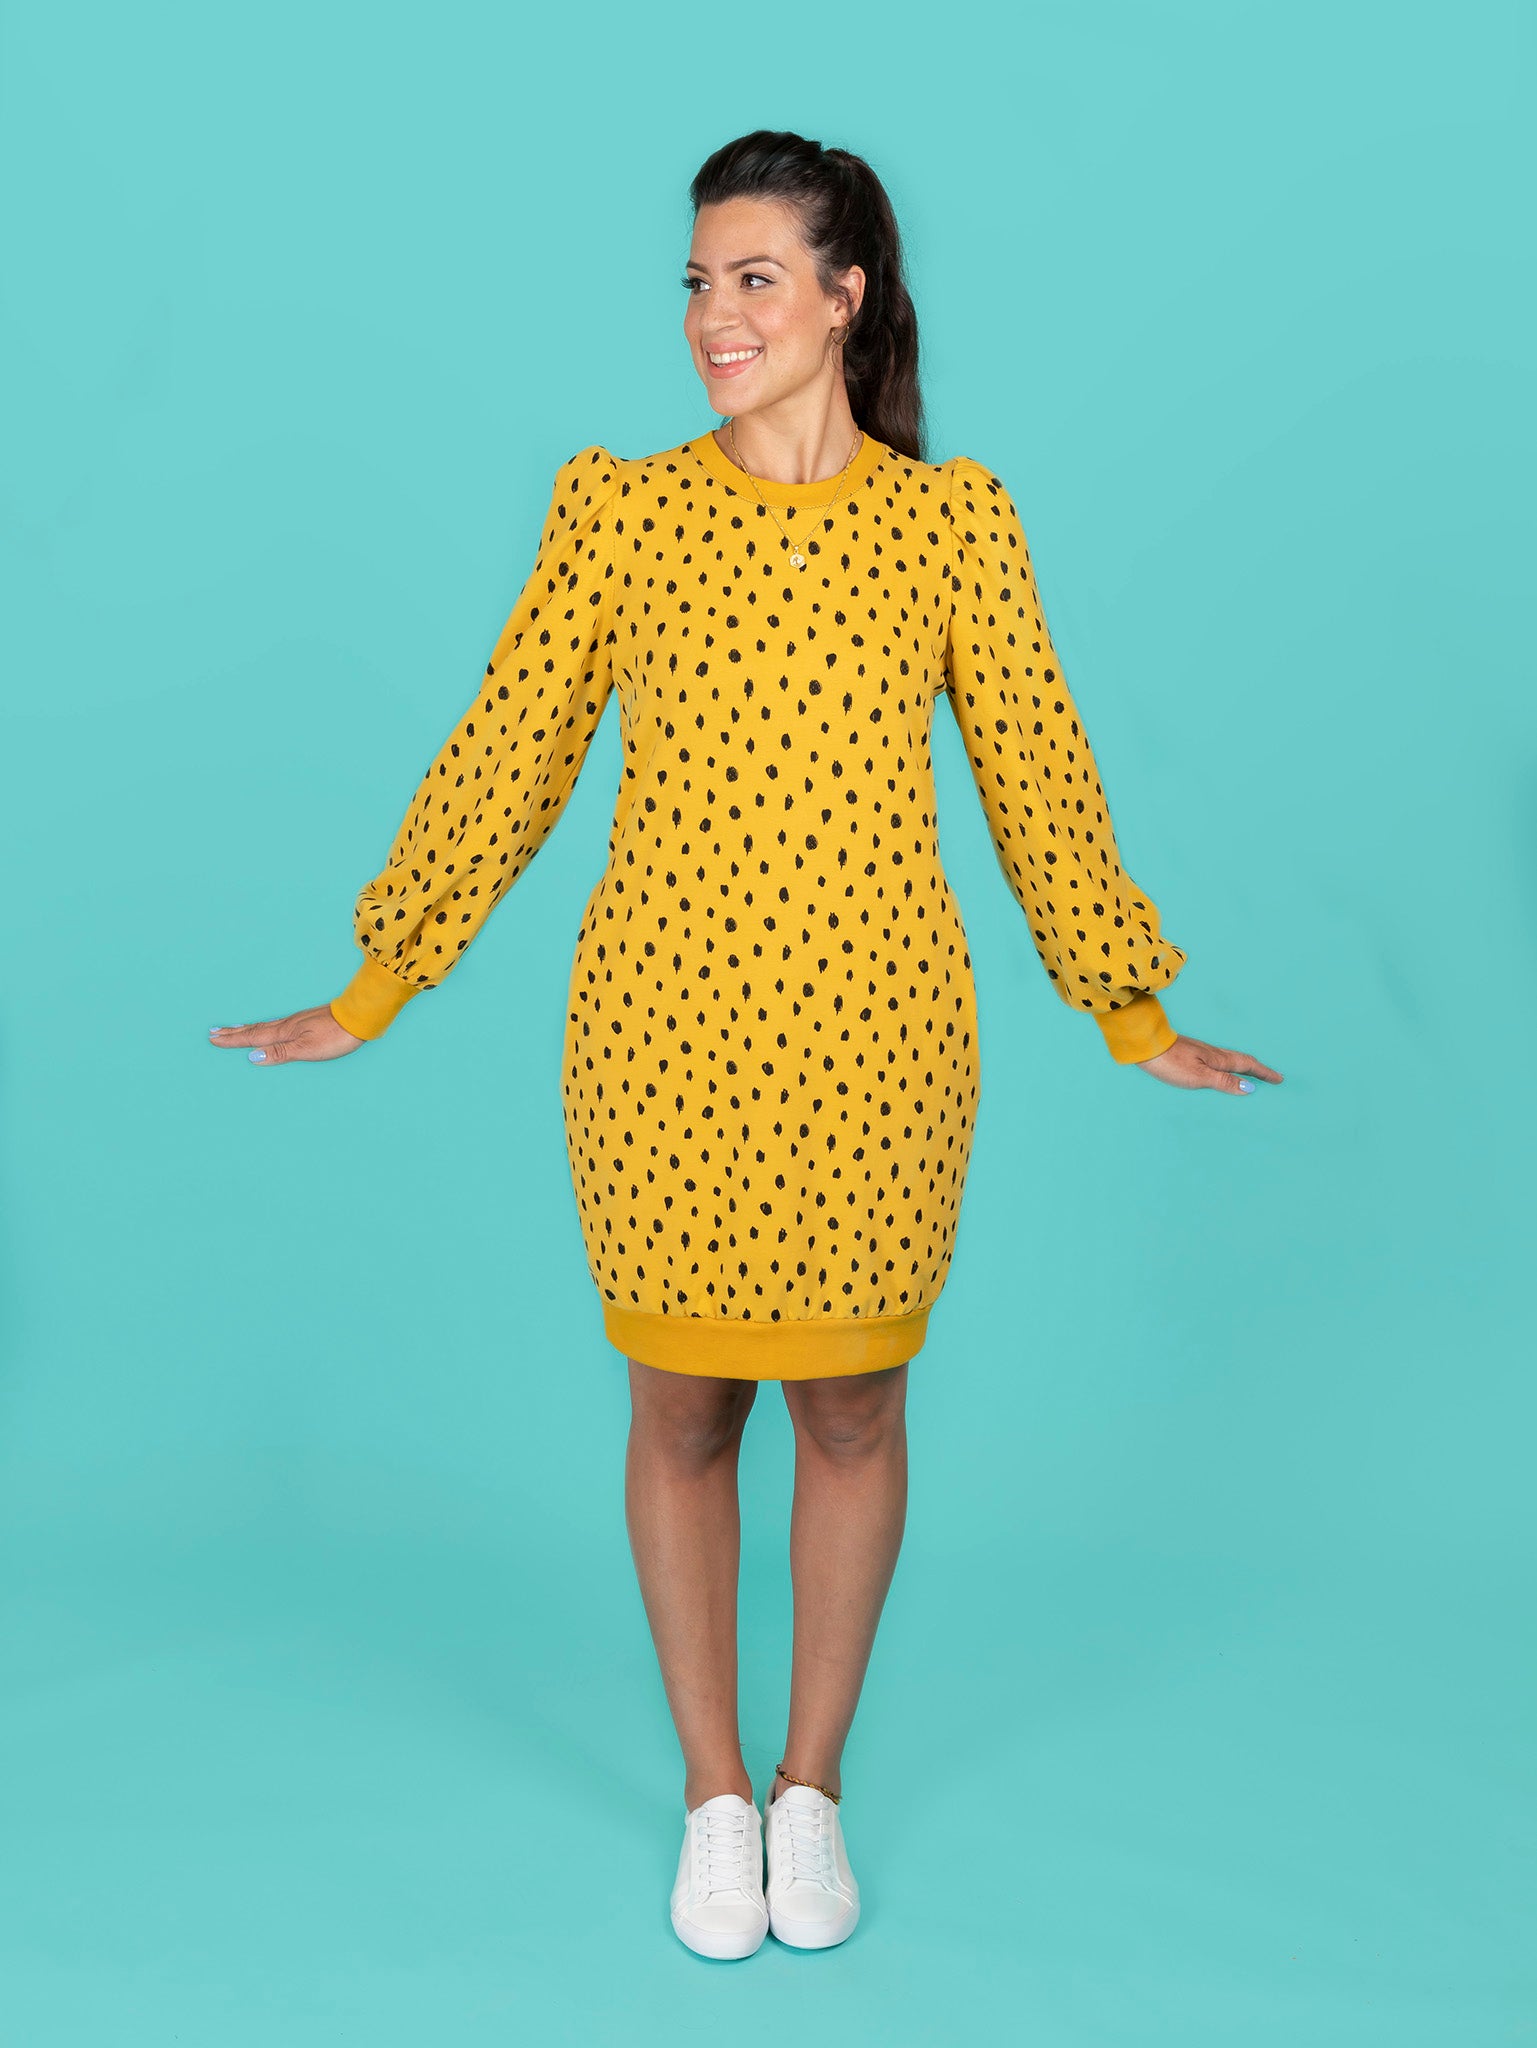 Tilly and the Buttons - Billie Sweatshirt and Dress Sewing Pattern